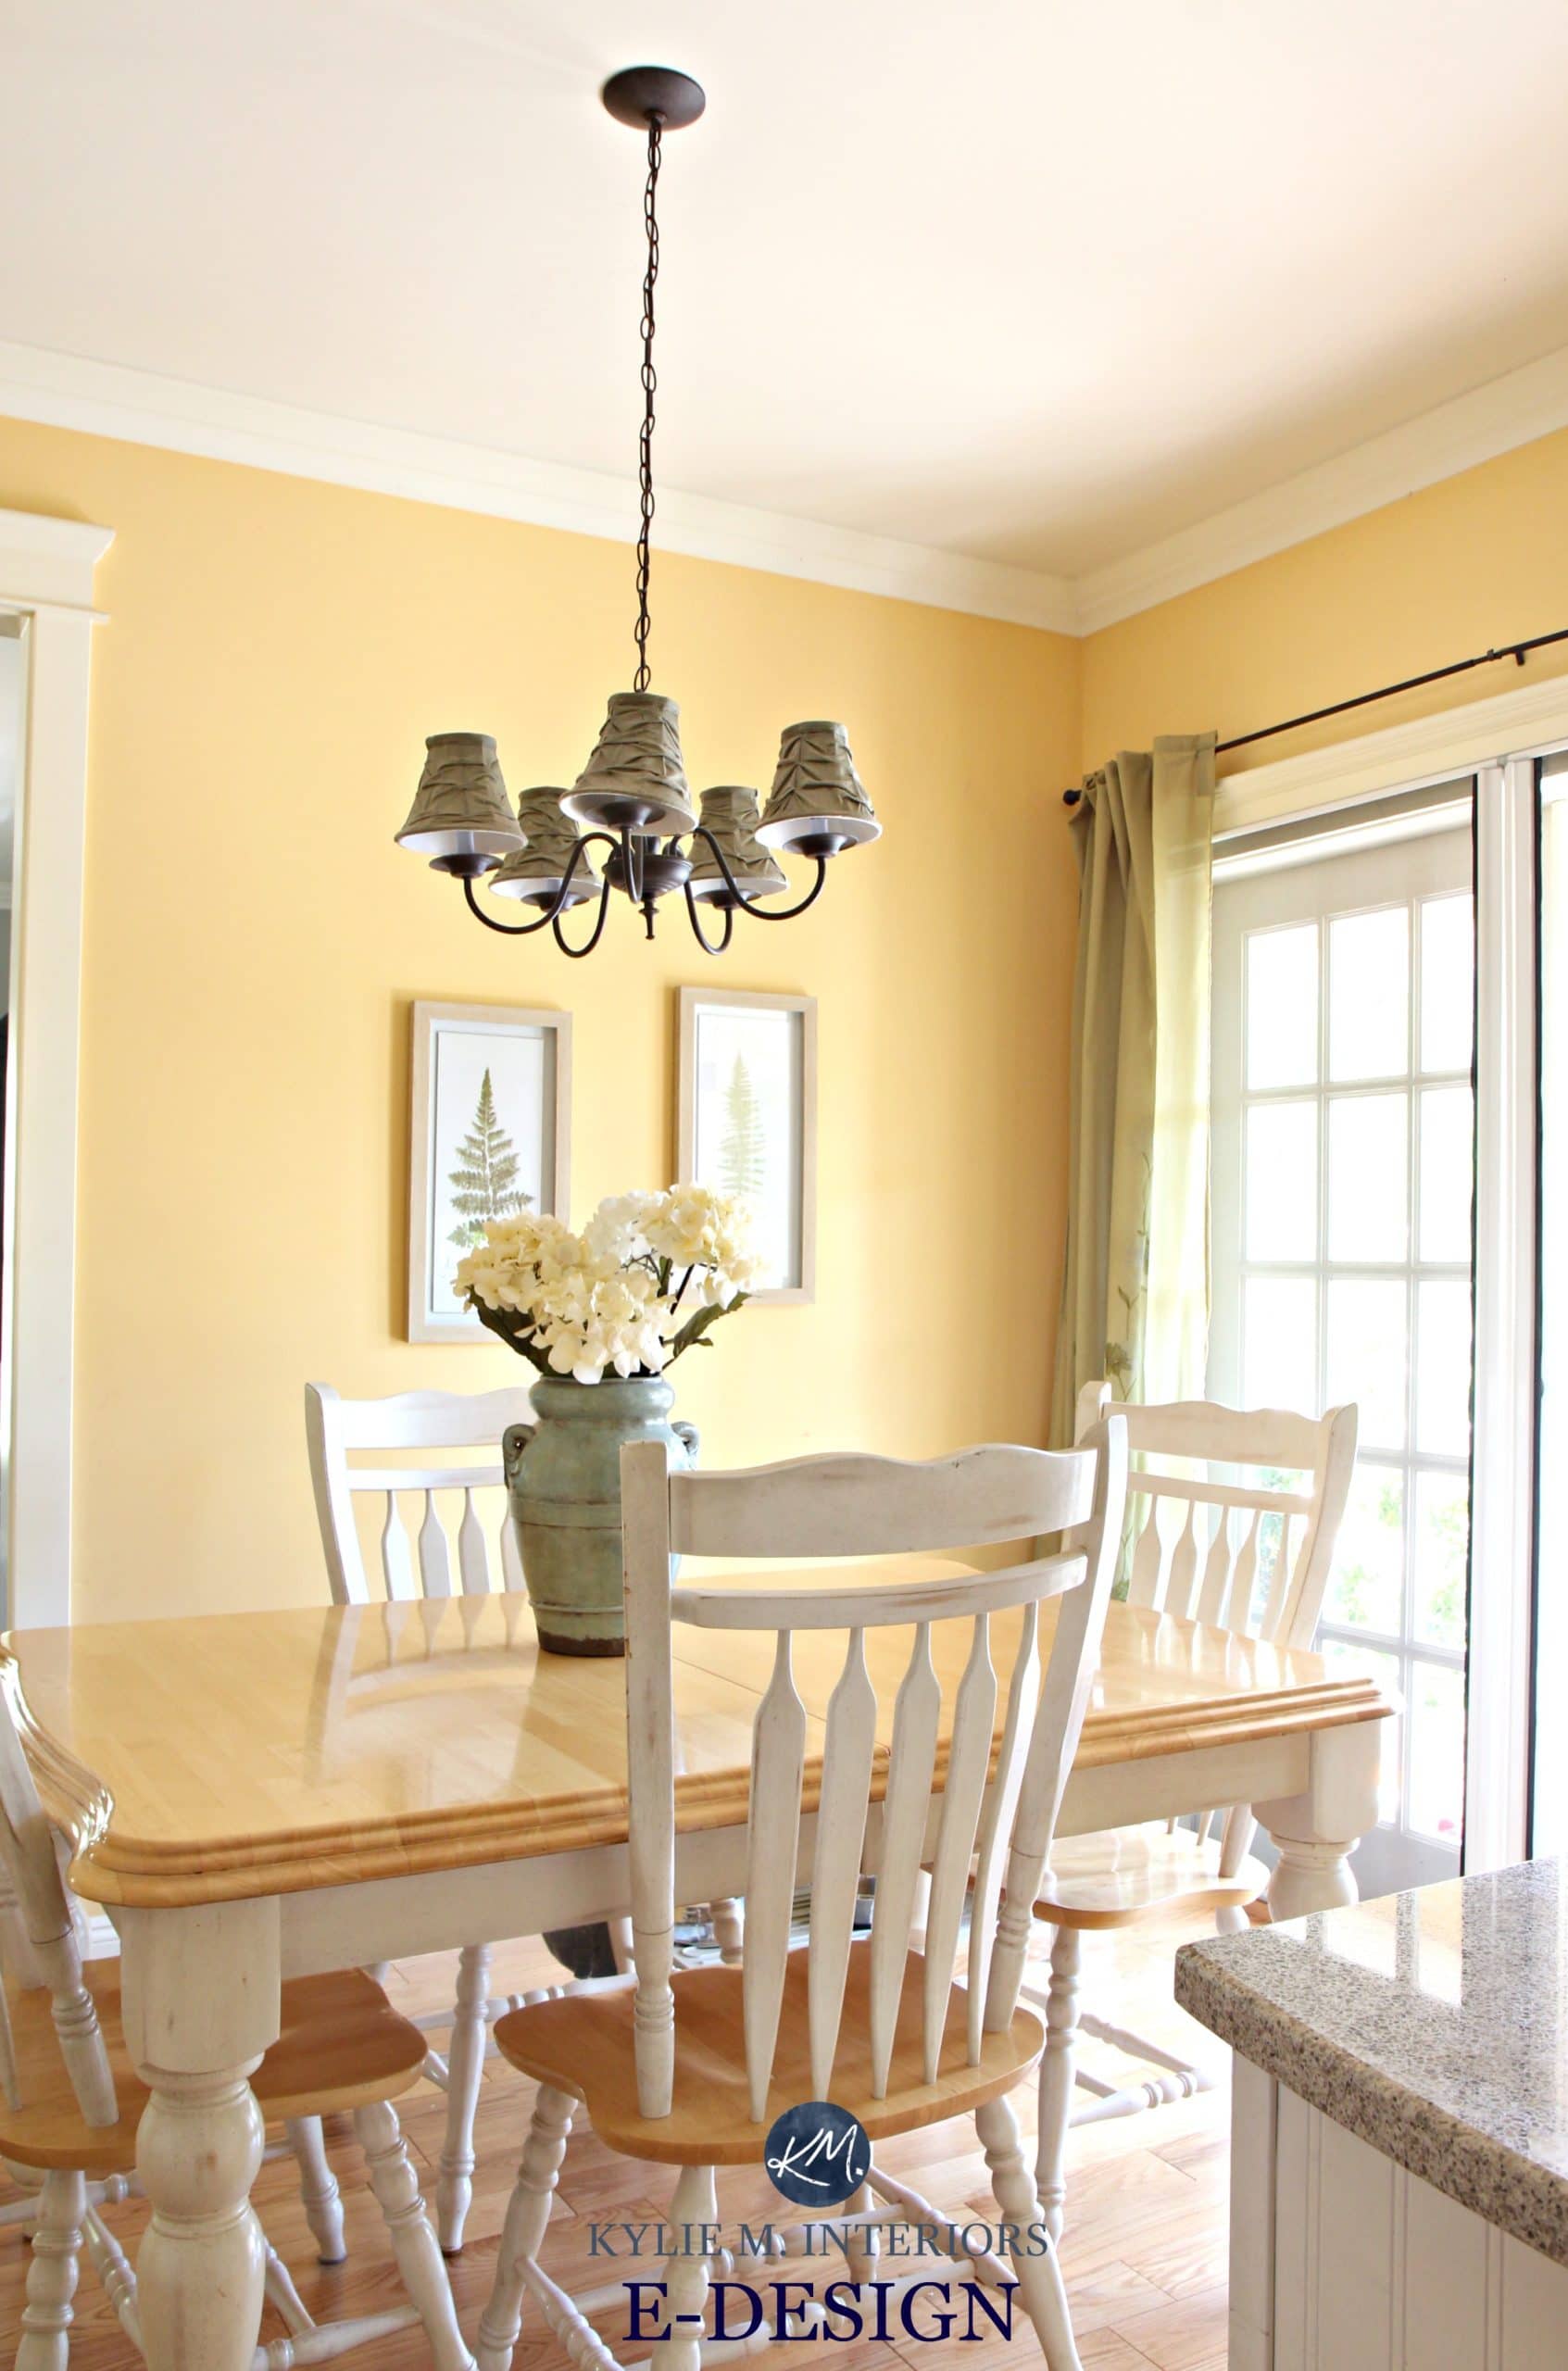 Benjamin Moore Suntan Yellow, eating nook in country style kitchen